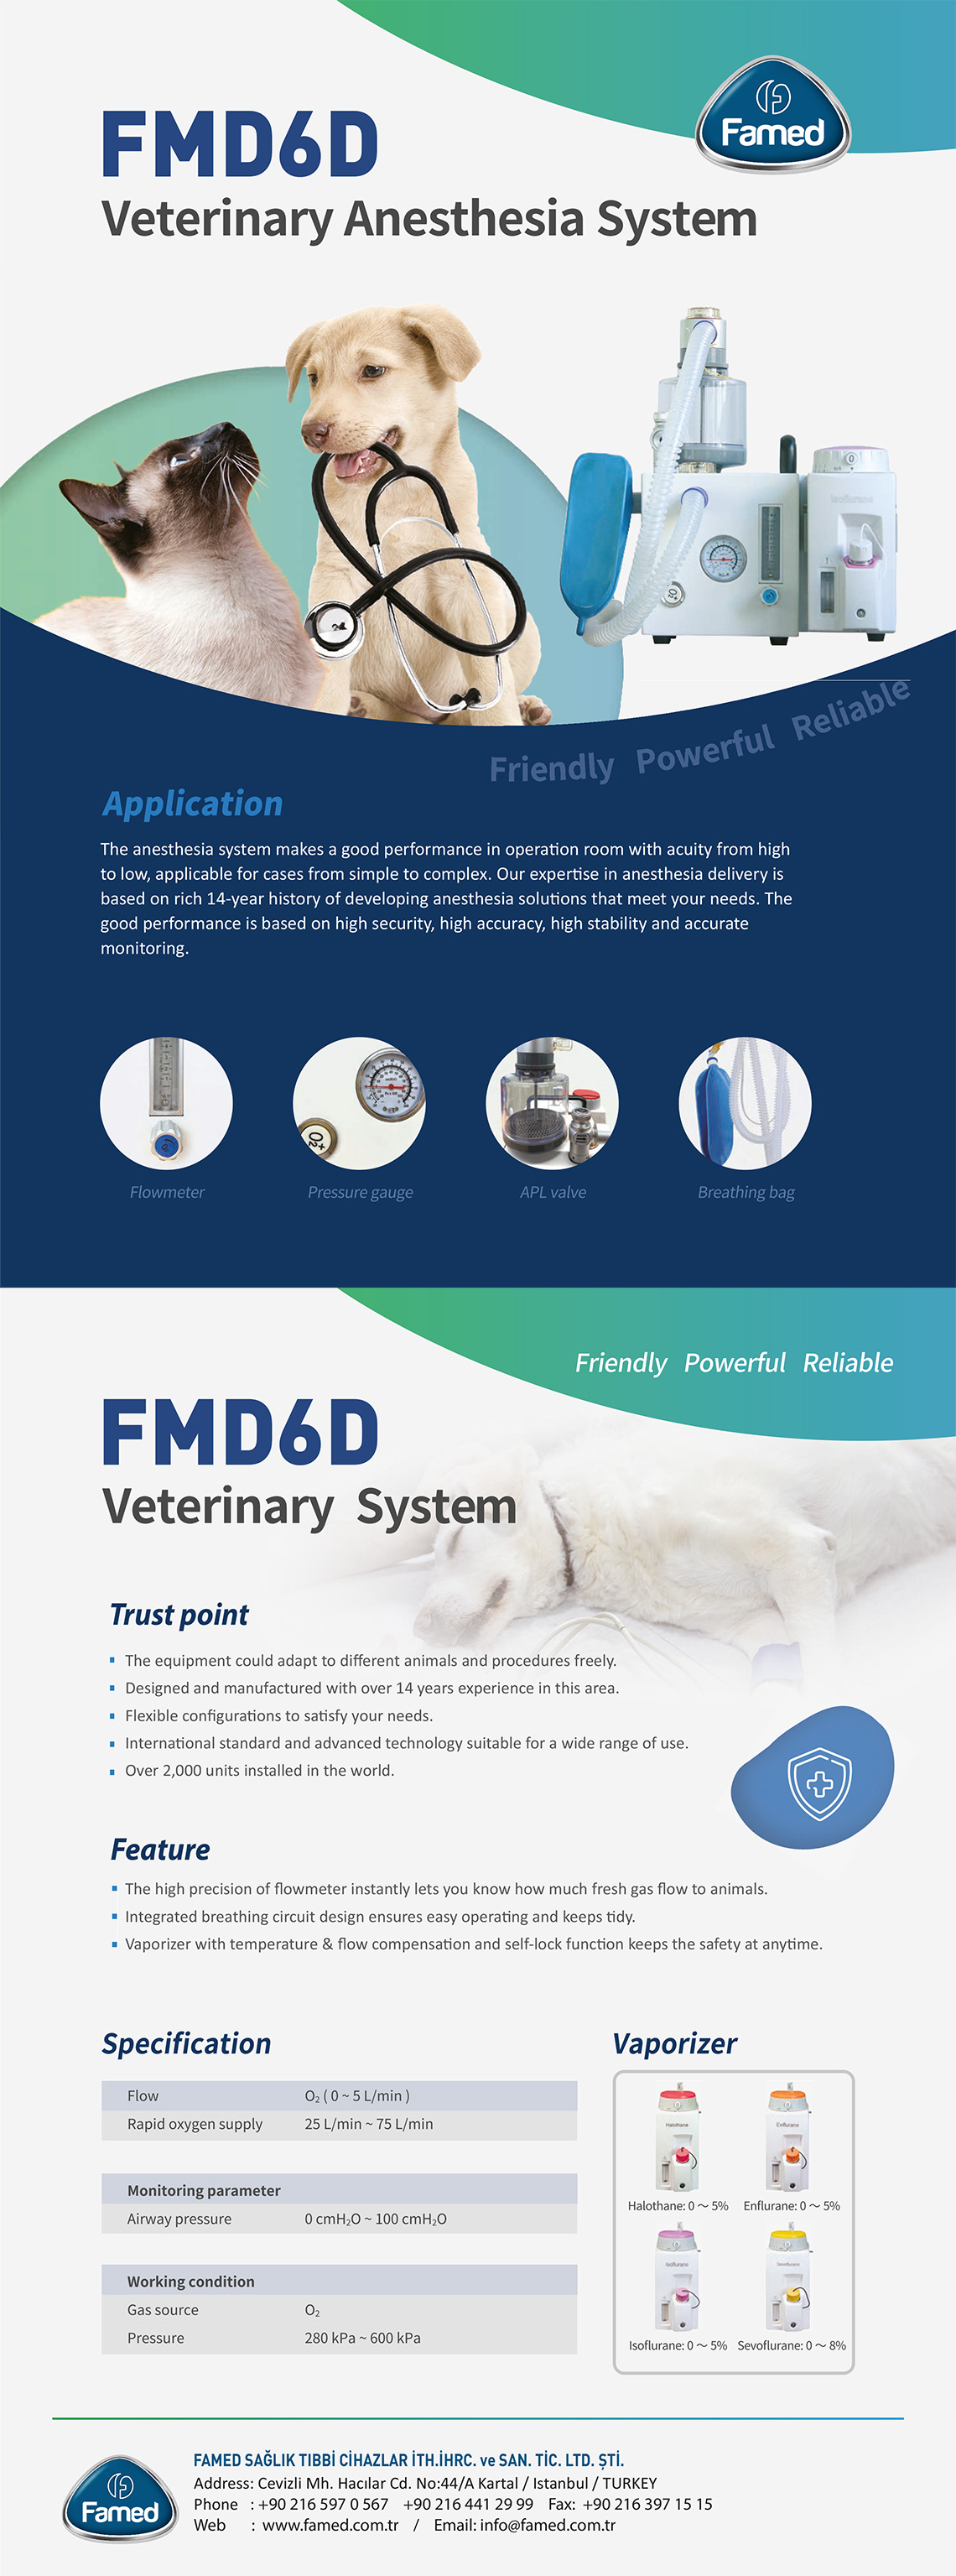 FMD-6D Veterinary Anesthesia System